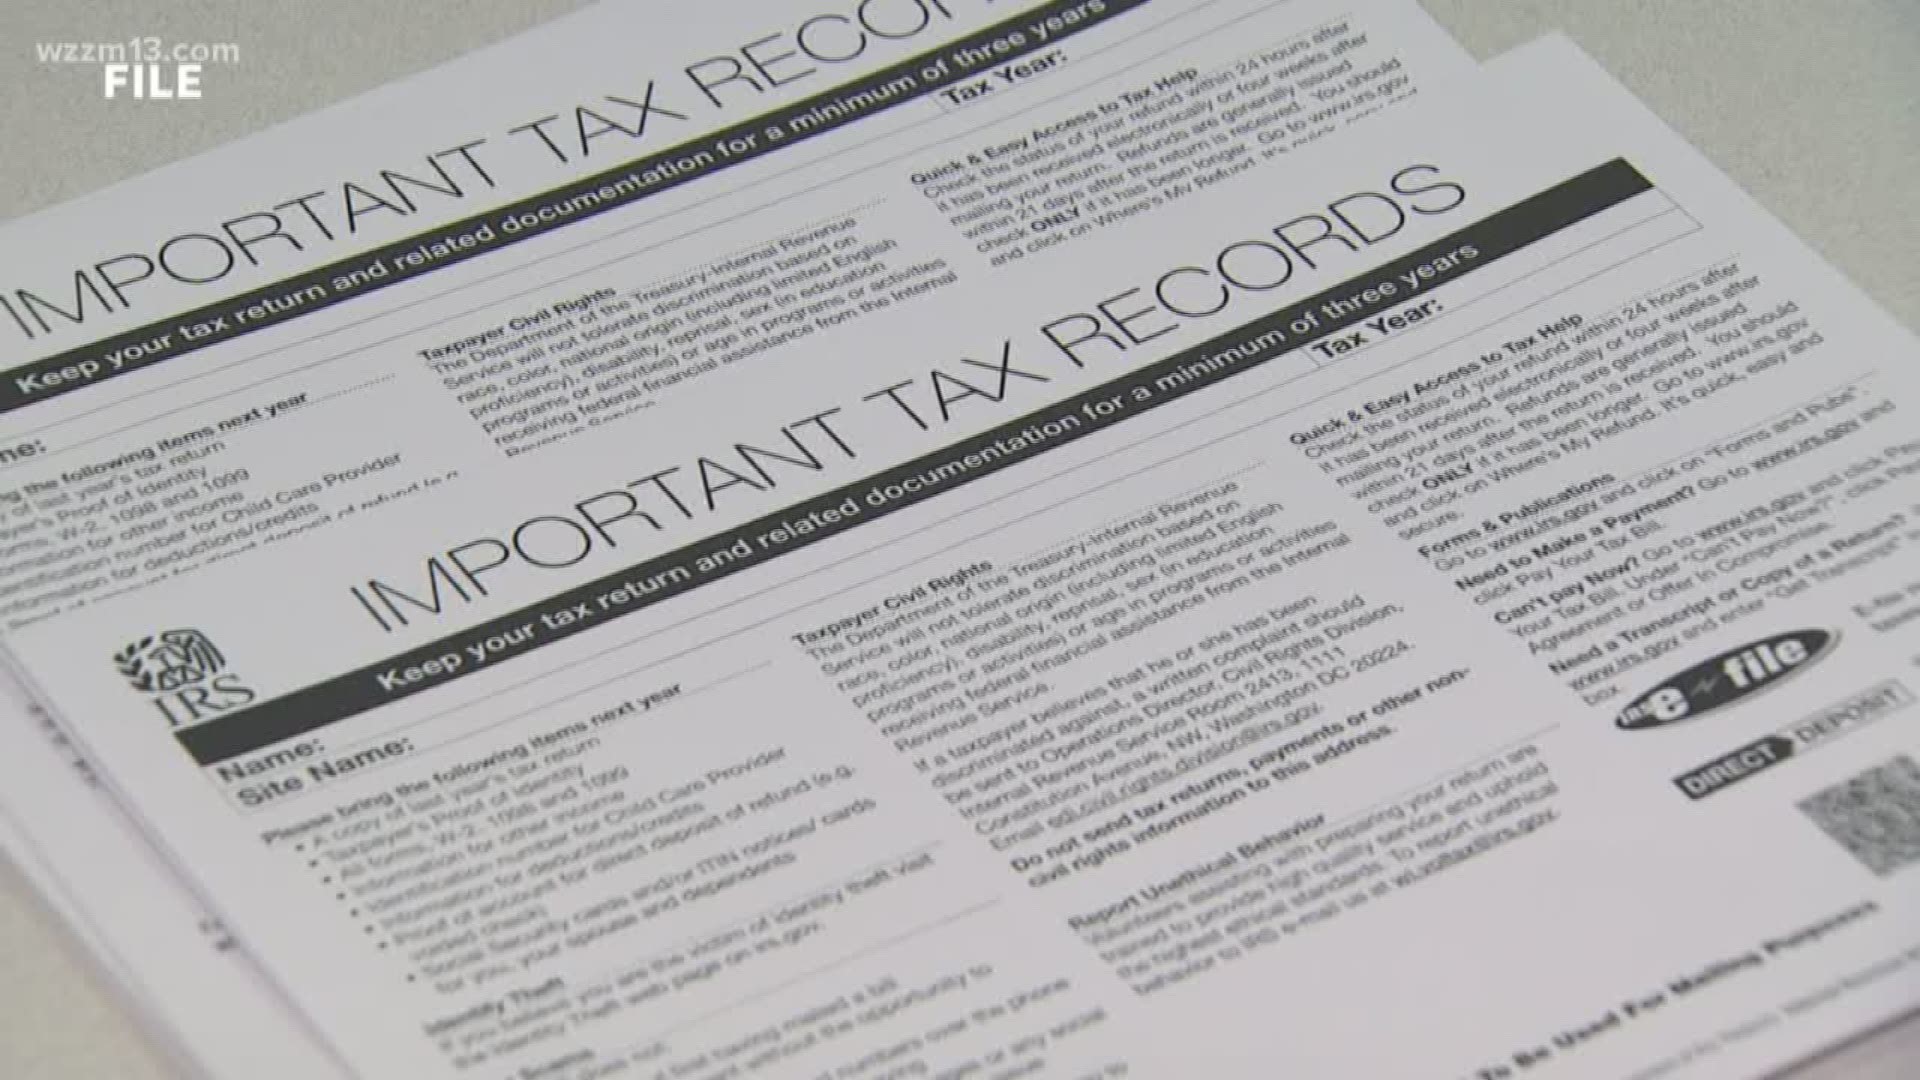 Need help with your taxes? West Michigan United Way is offering free tax help for qualified residents.